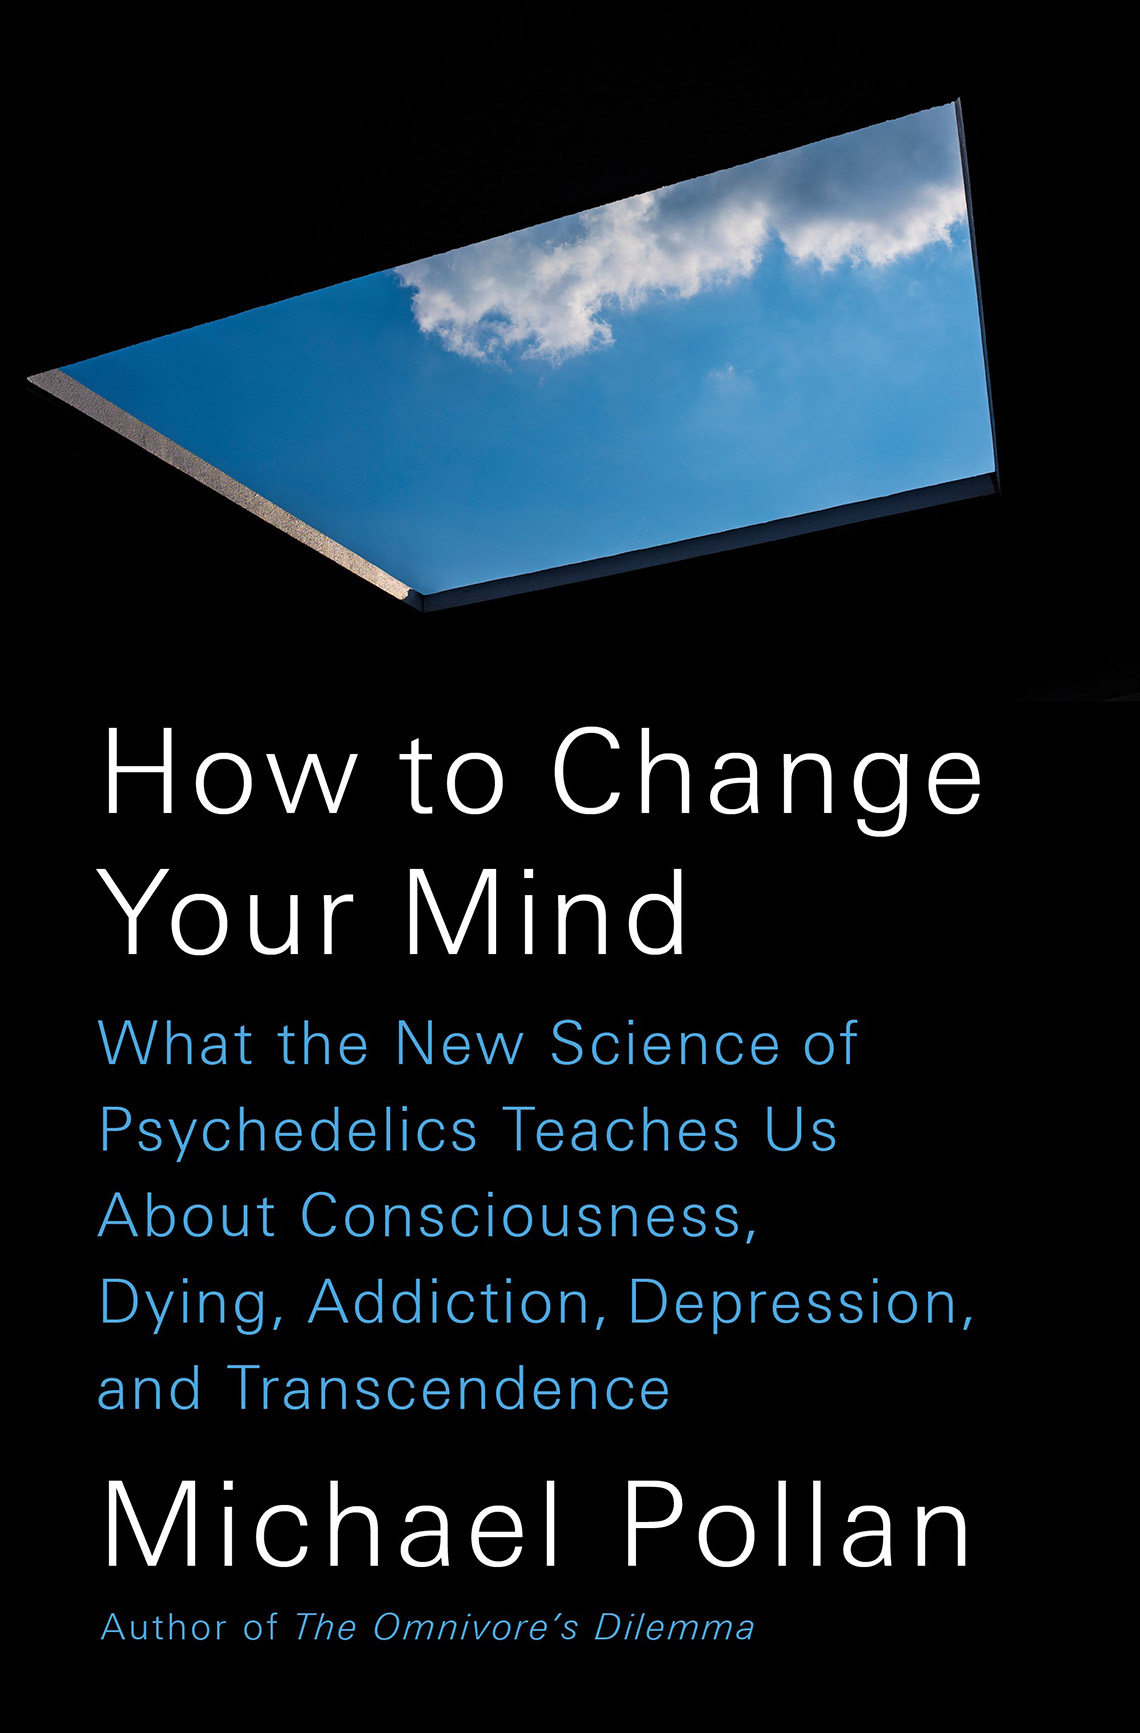 book cover, text reads: How to Change Your Mind, Michael Pollan